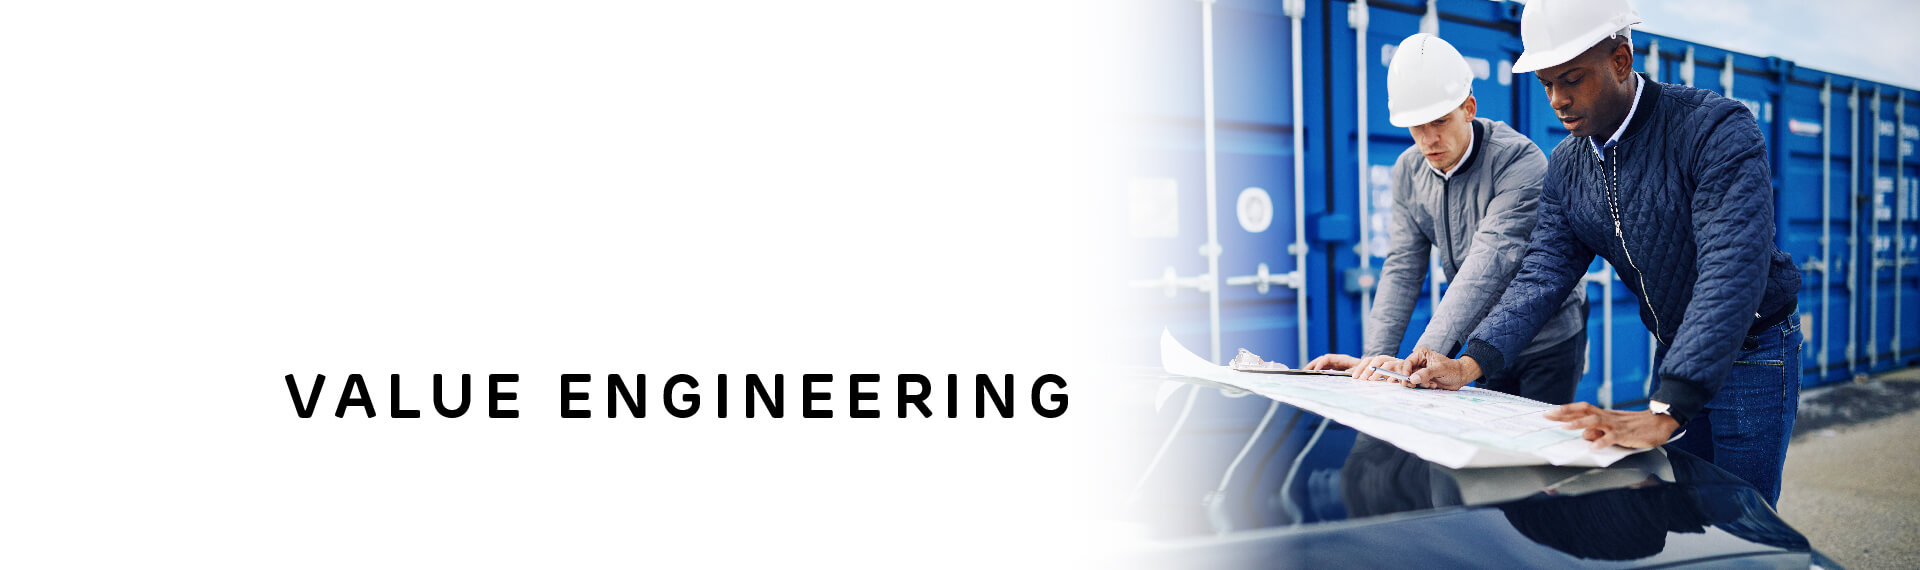 Header image with “Value Engineering” in capital letters; with a photo of two workmen in hardhats reviewing blueprints.